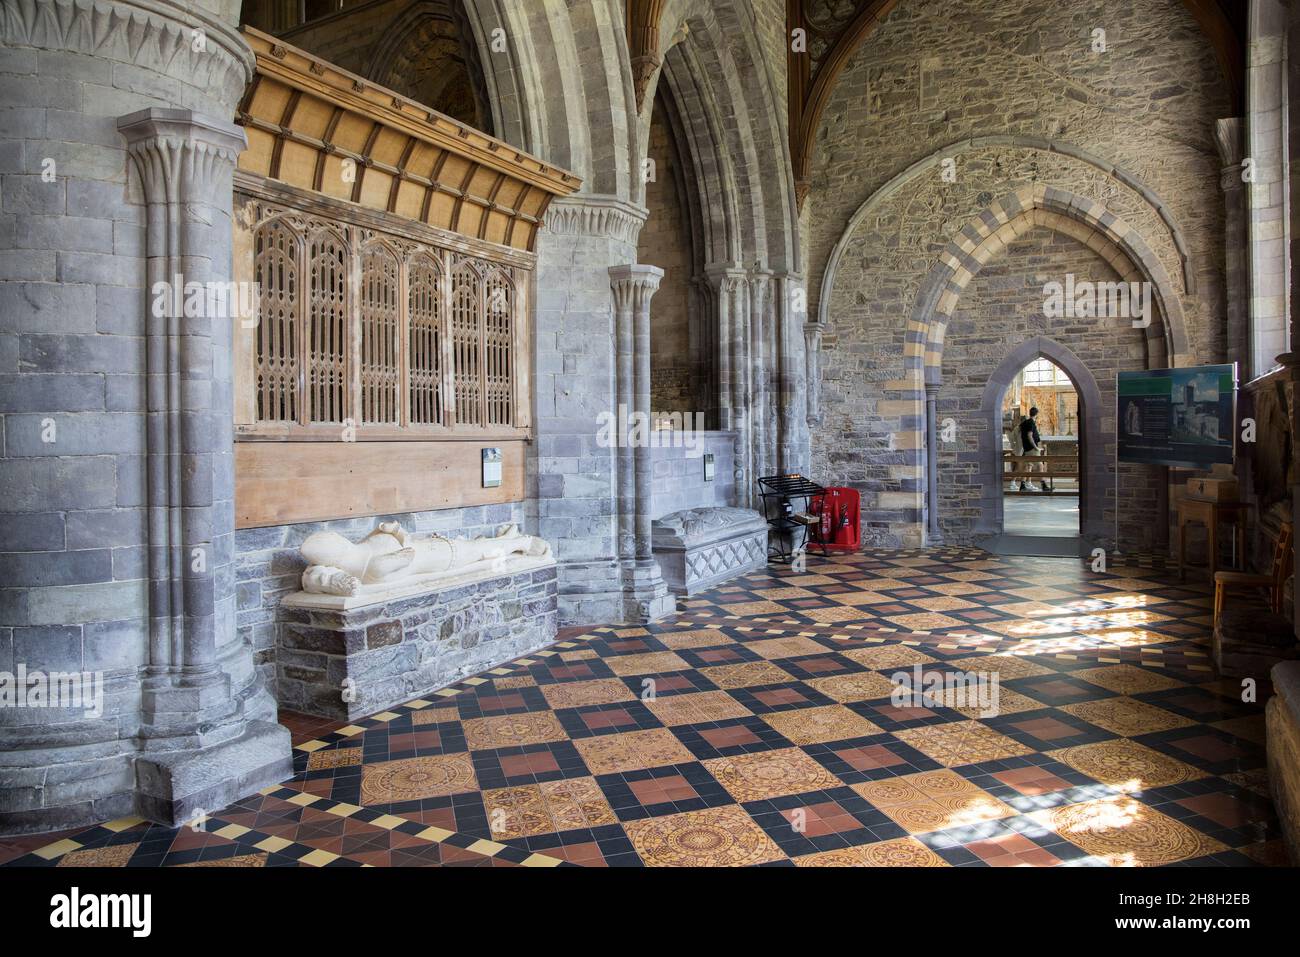 Tiled floor and tombs, St Davids Cathedral, Pembrokeshire, Wales, UK Stock Photo